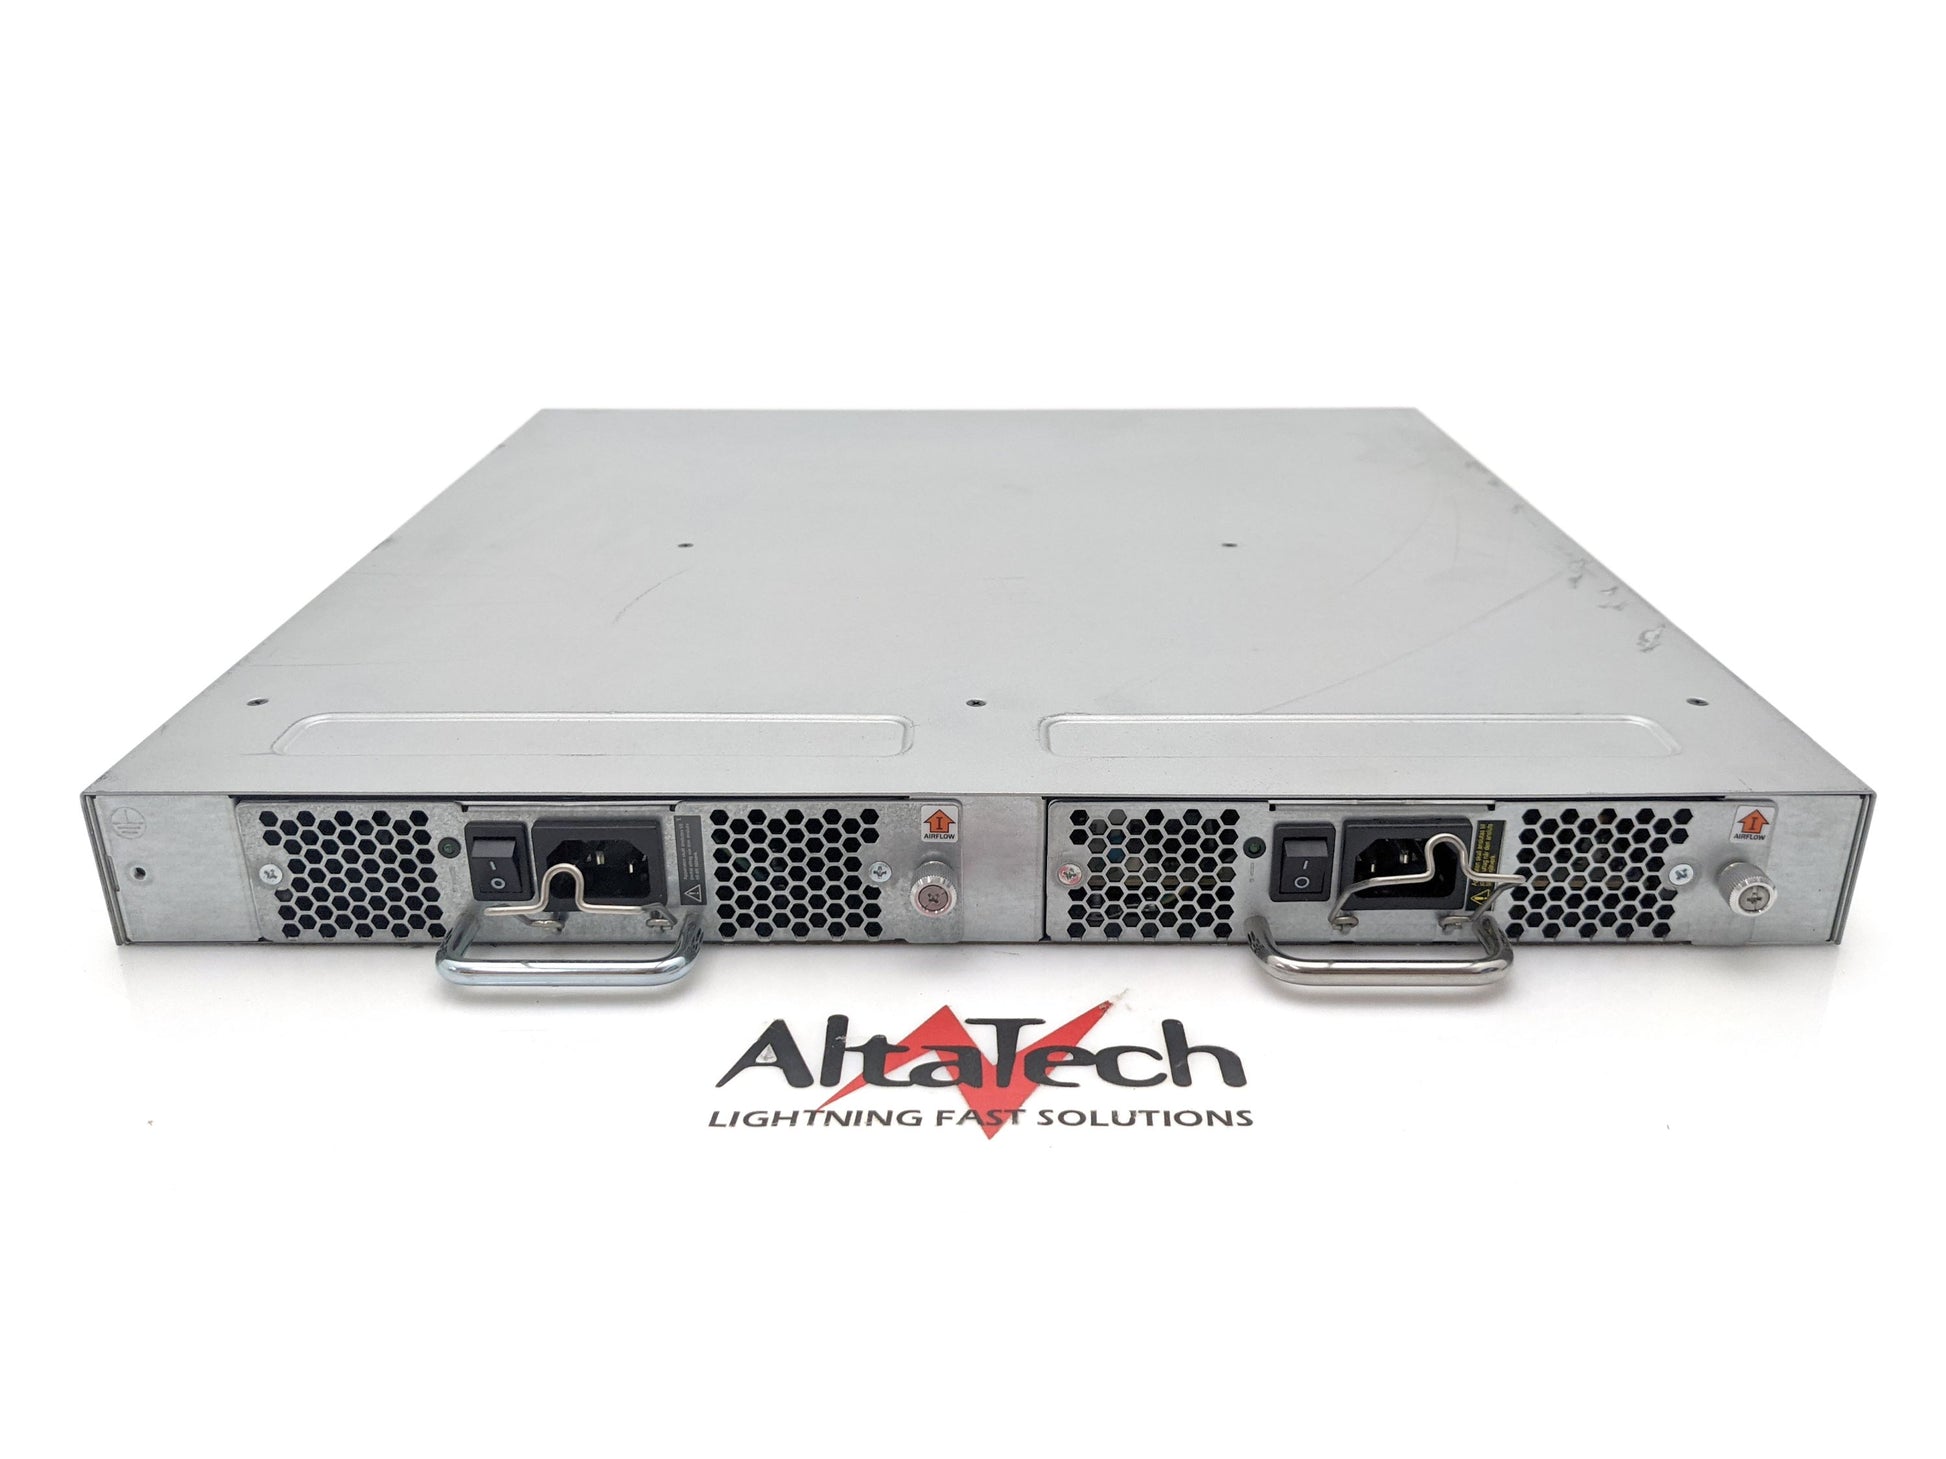 Brocade DS-6505B_24P-16G 6505 DS-6505B 24-Port 16Gbps Fibre Channel Switch for EMC SAN, Used